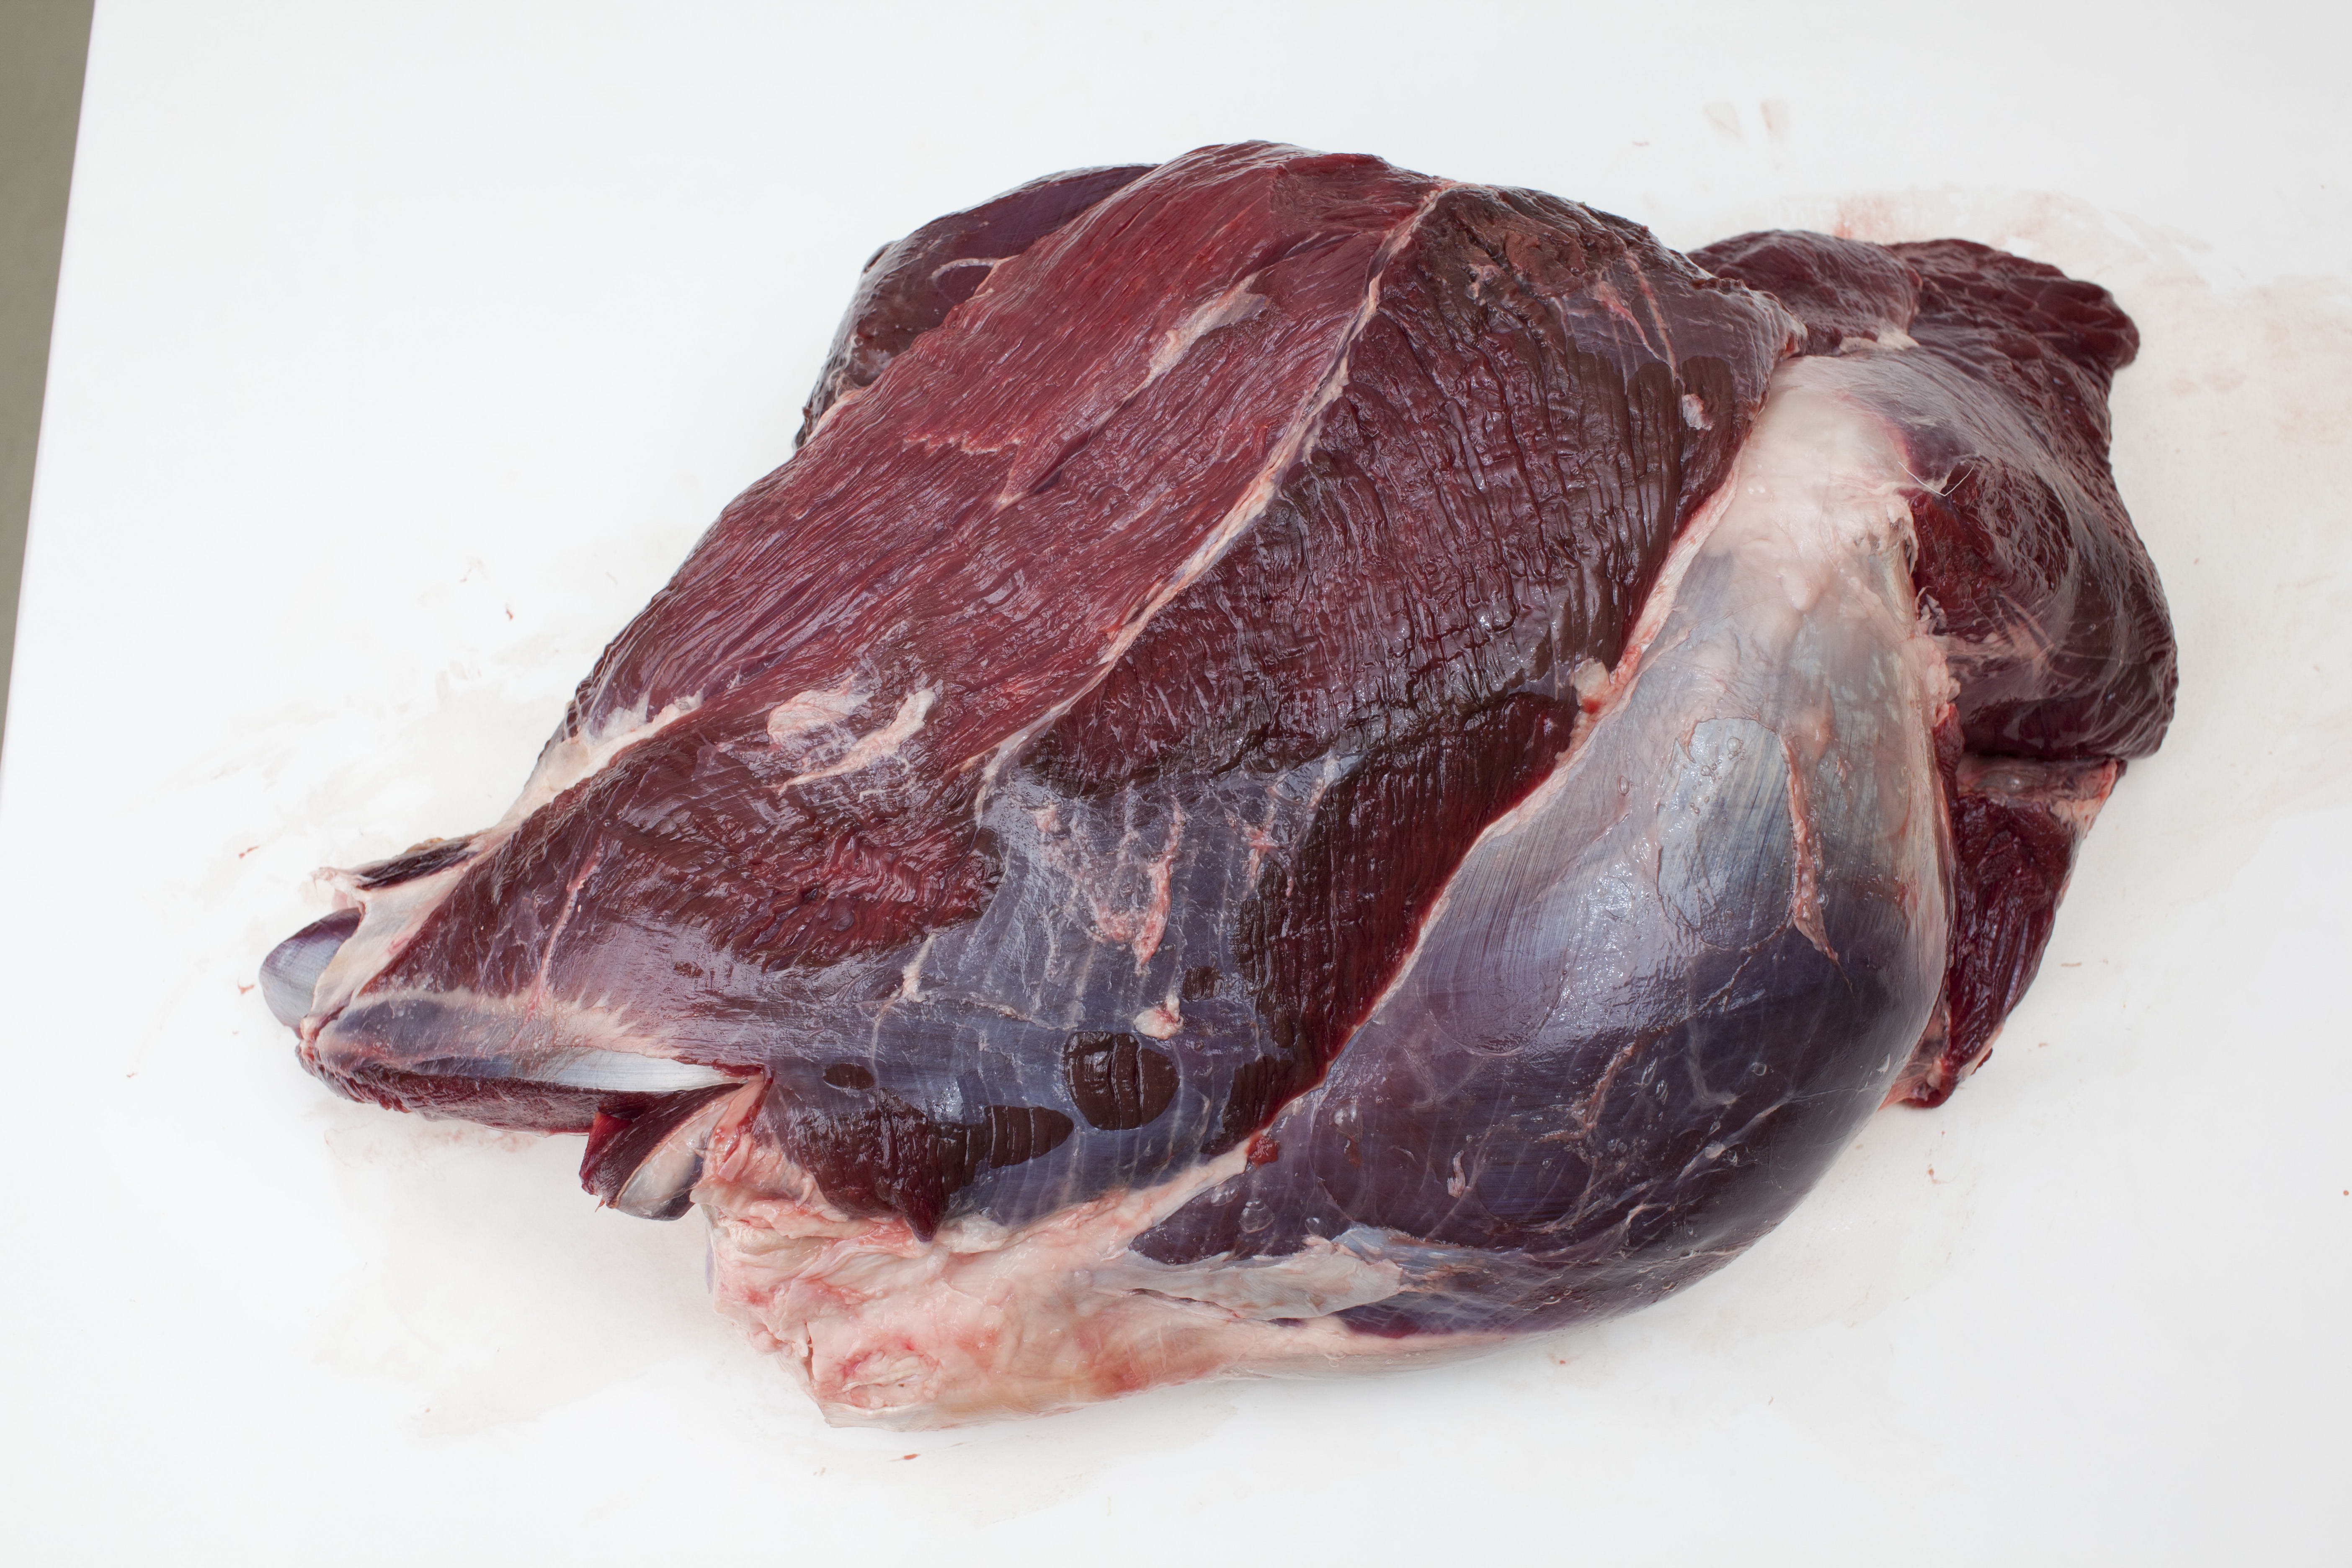 Deer Meat Wholesale in Malaysia